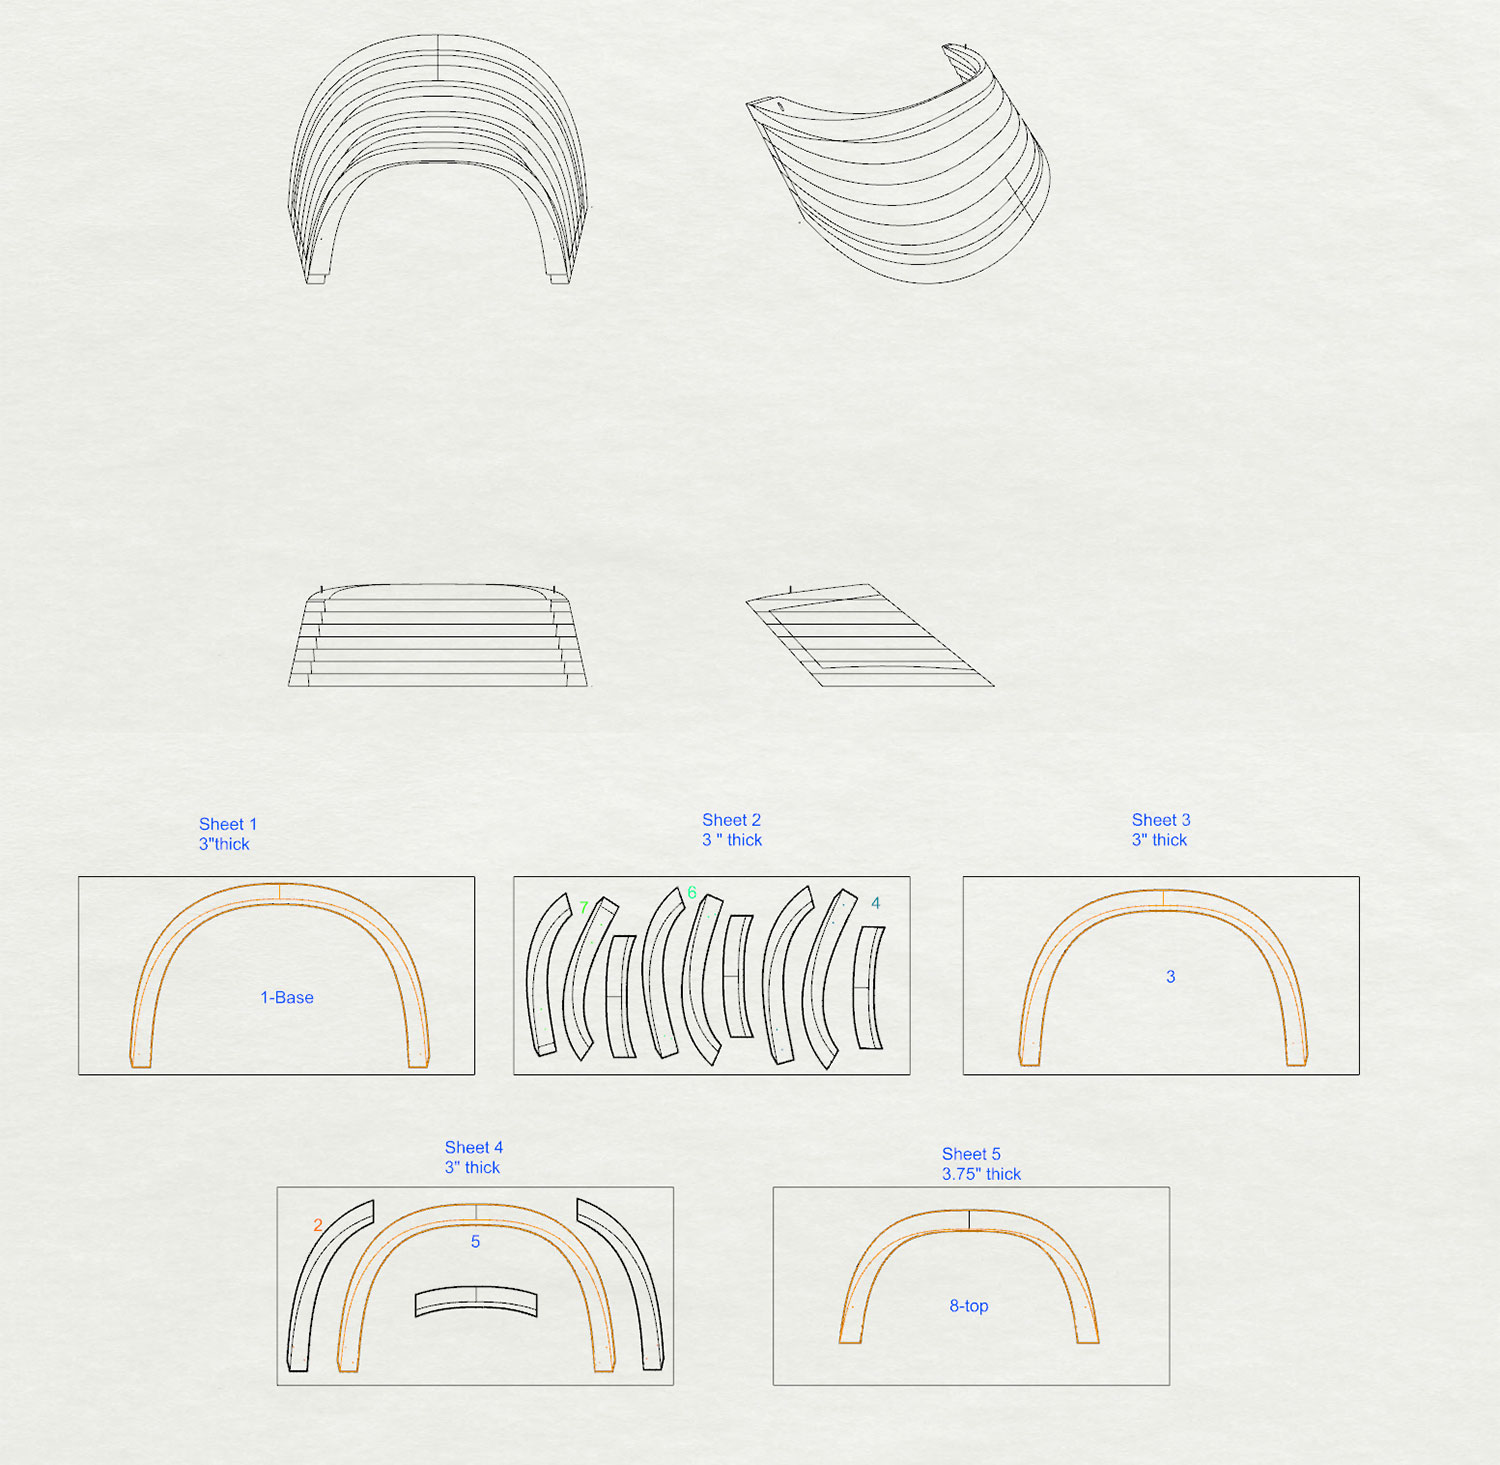 Sketches of windshield mold for boat.